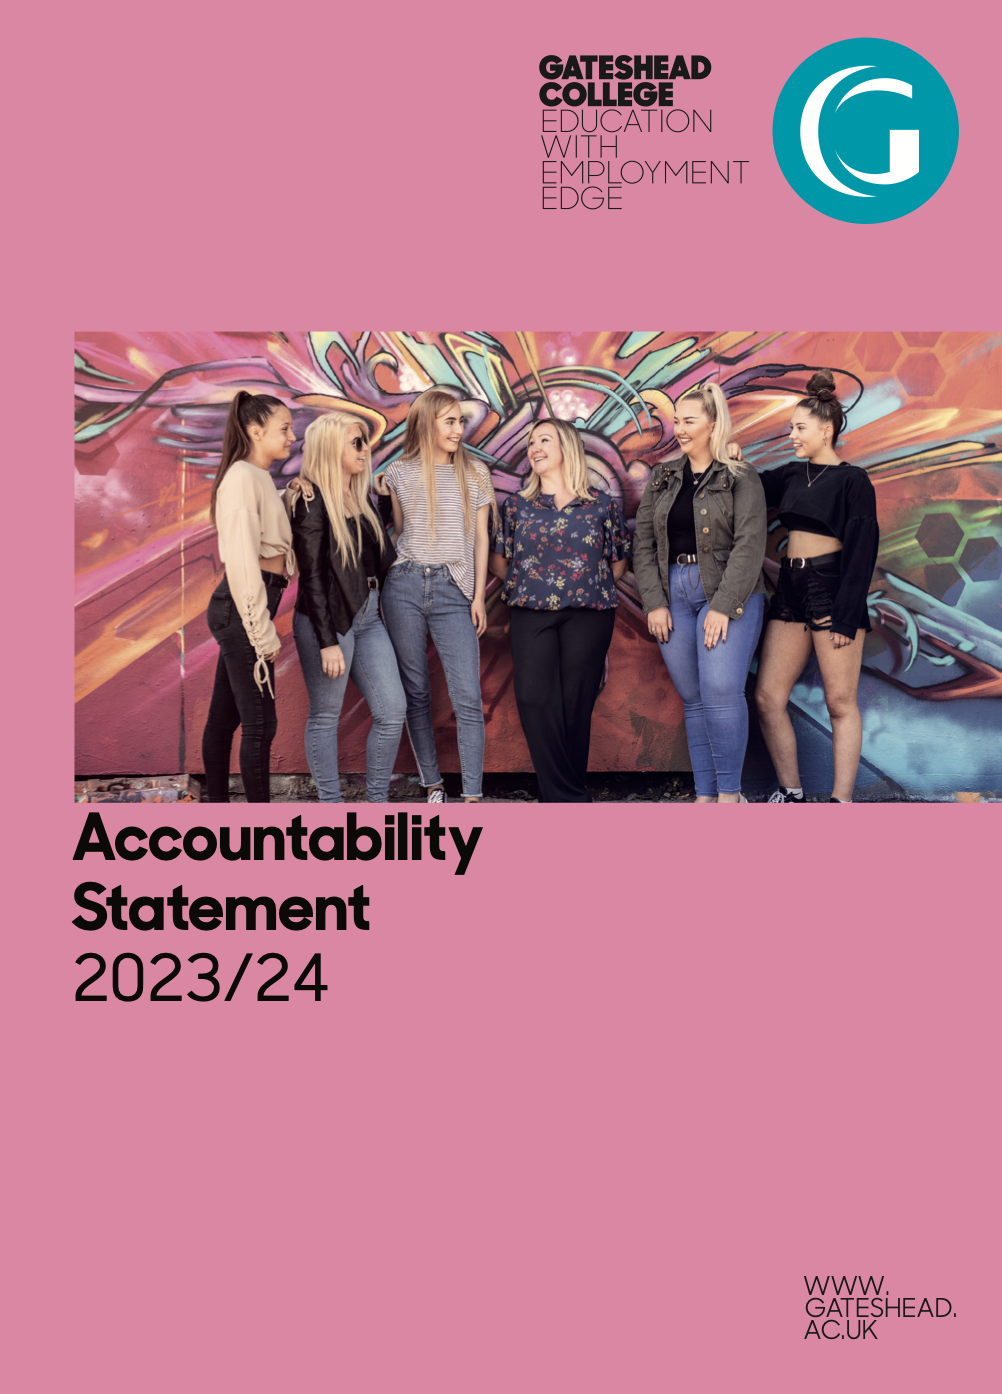 View our Accountability Statement 23/24 image